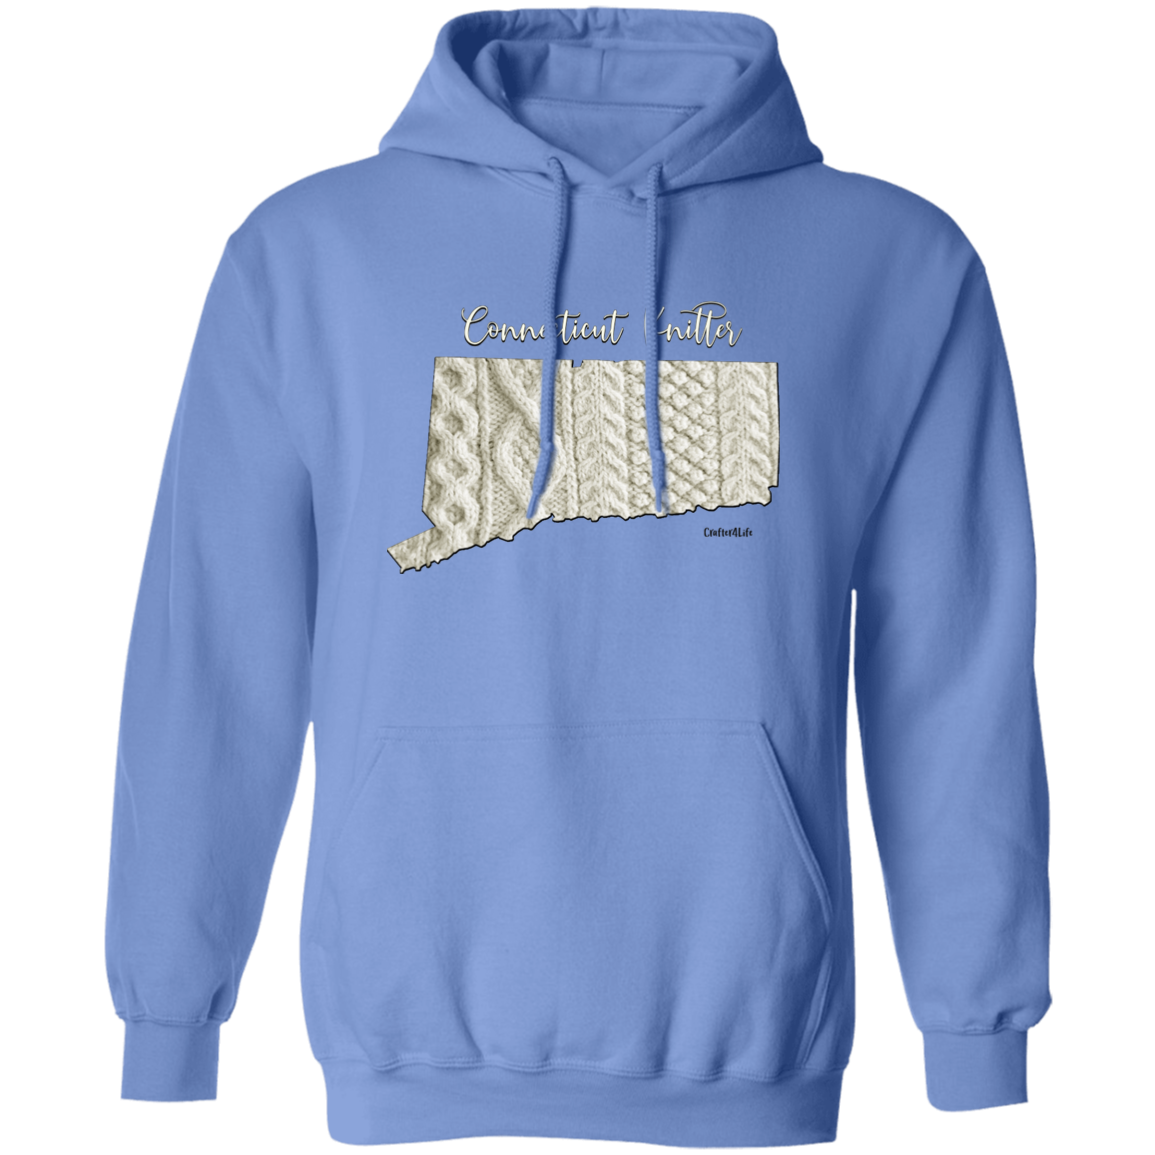 Connecticut Knitter Pullover Hoodie